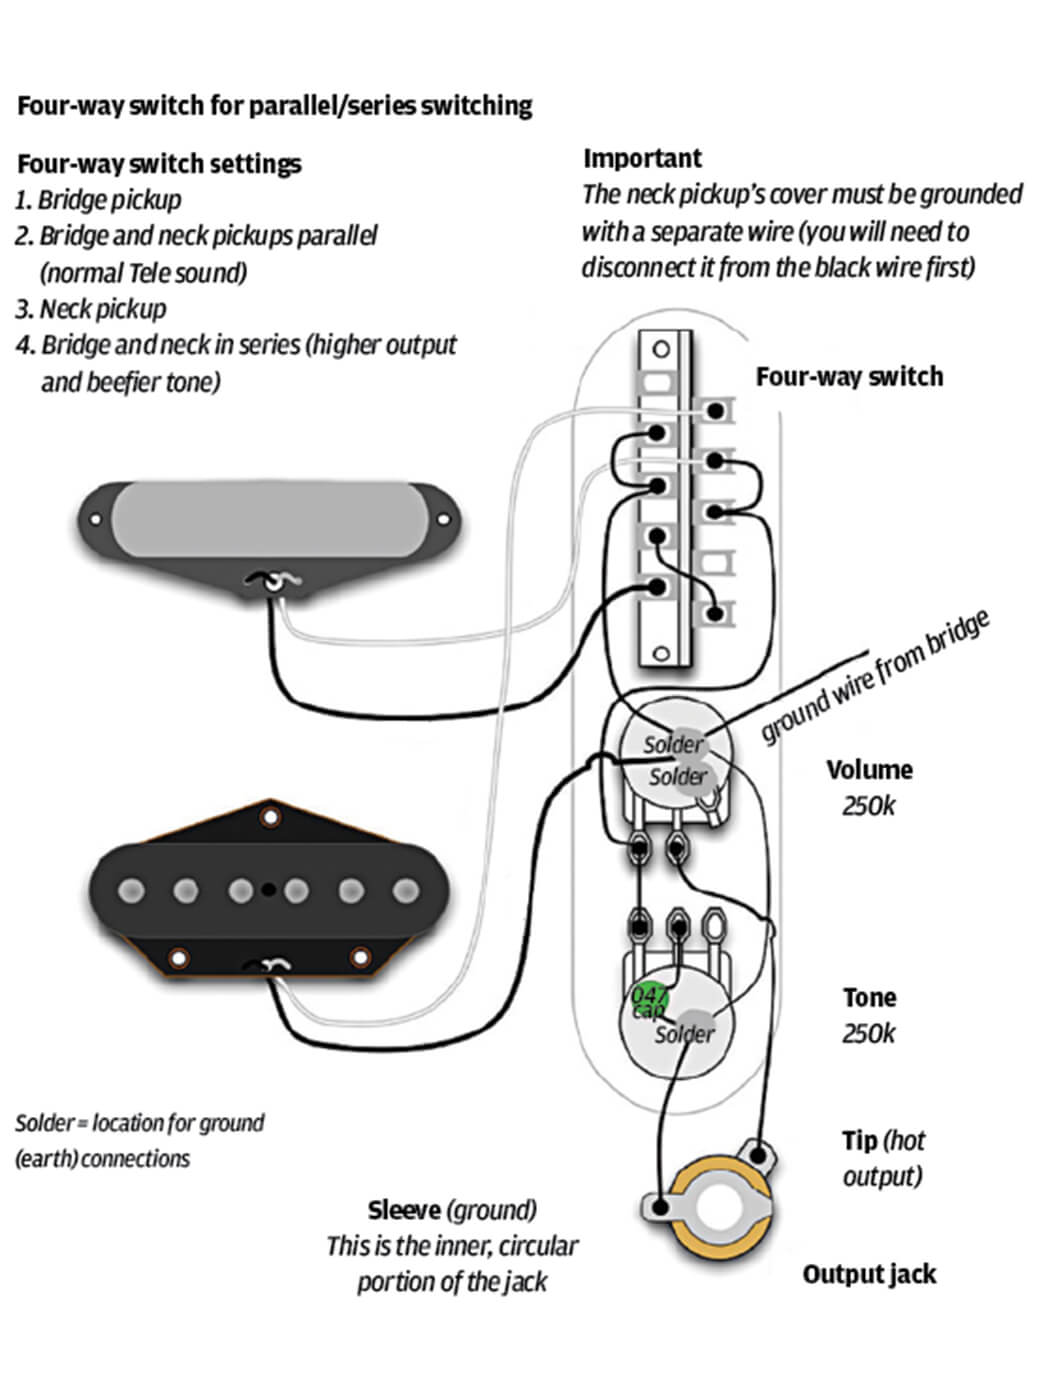 4 Way Switch Reverse Telecaster Wiring Diagram Seymour Duncan from guitar.com